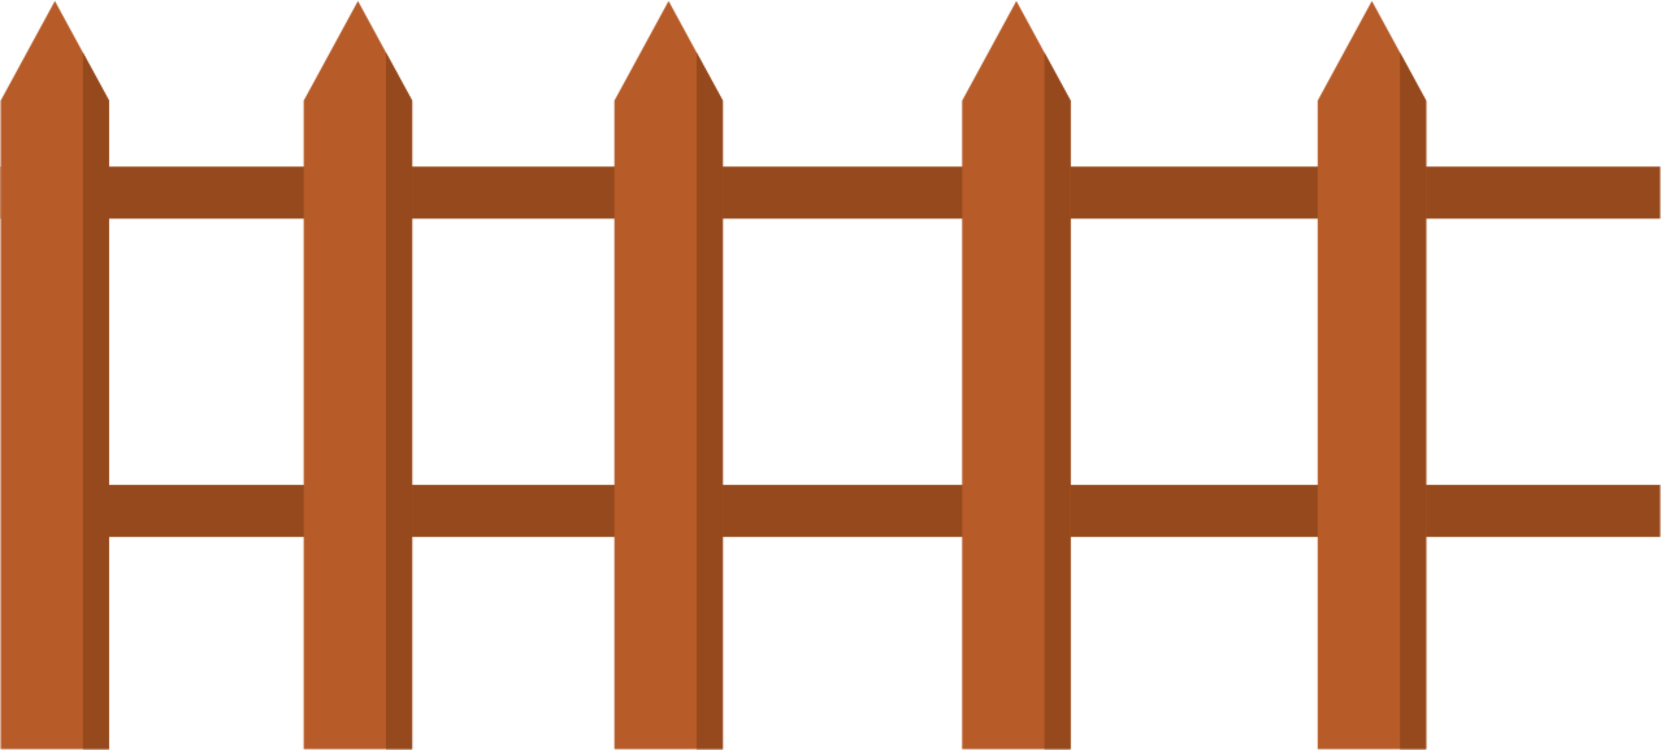 Wooden Fence Free PNG Image